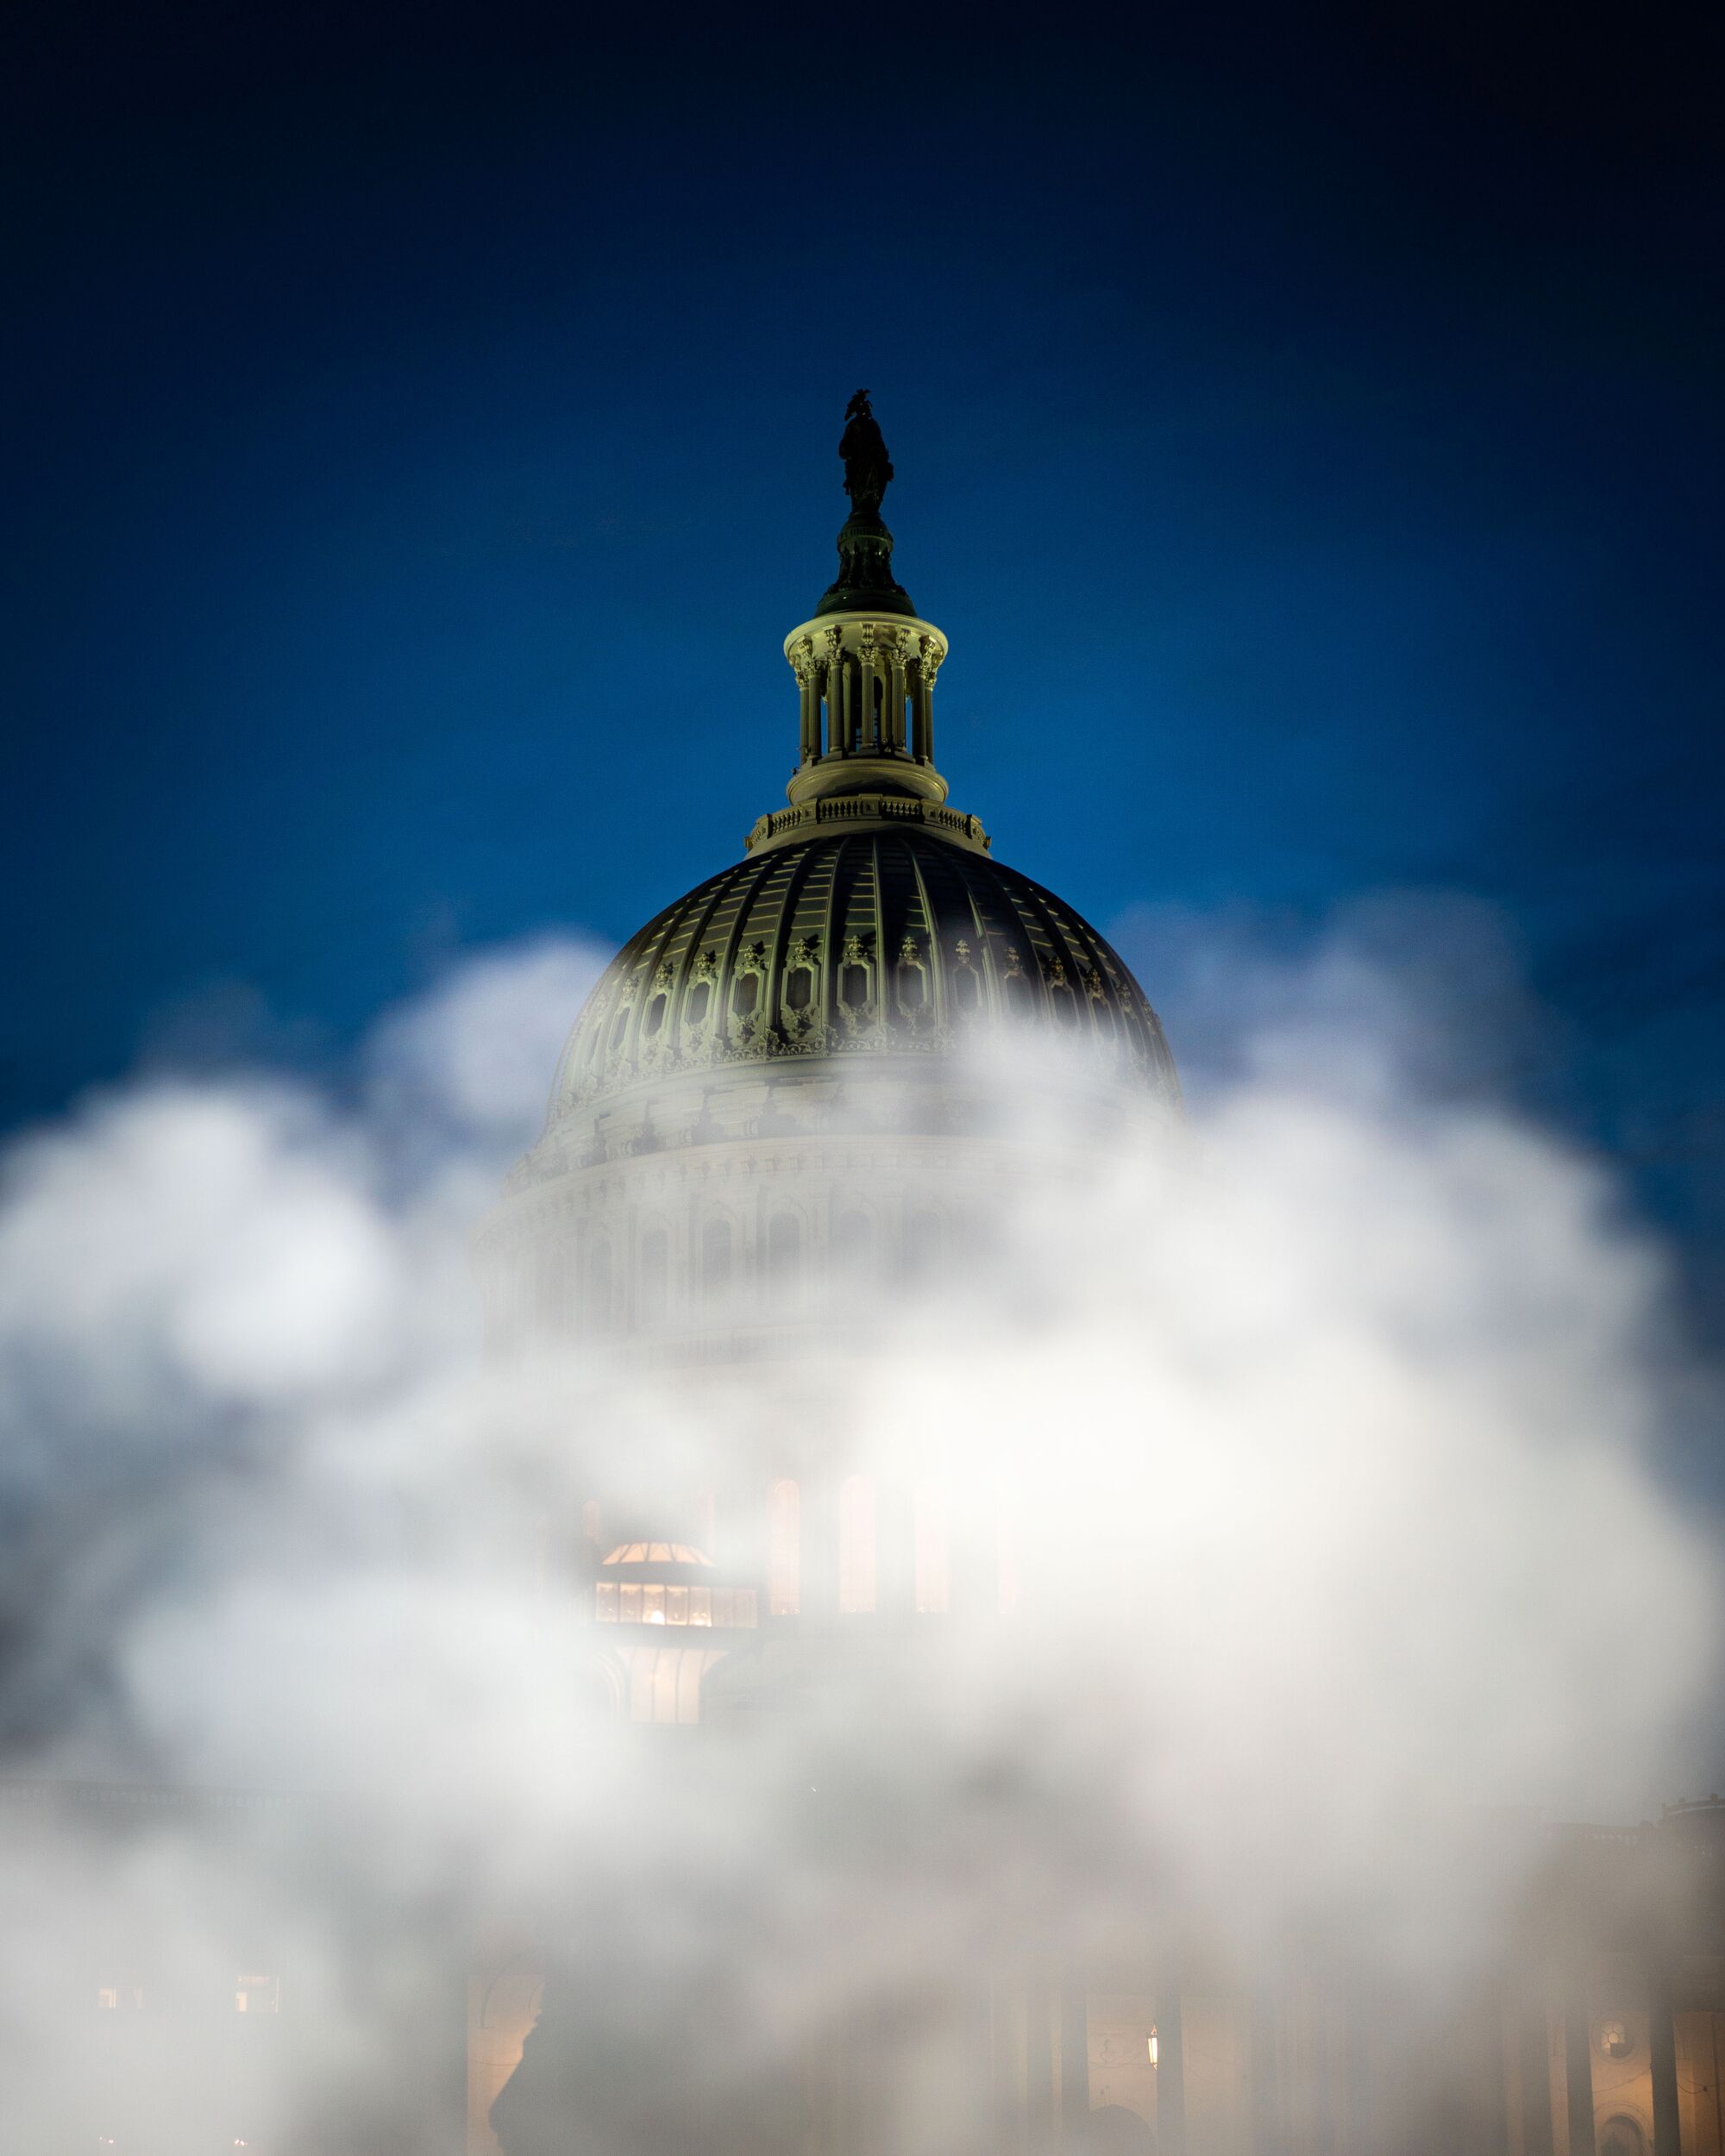 A vertical, twilight frame of the U.S. Capitol rotunda tower partially obscured by steam.